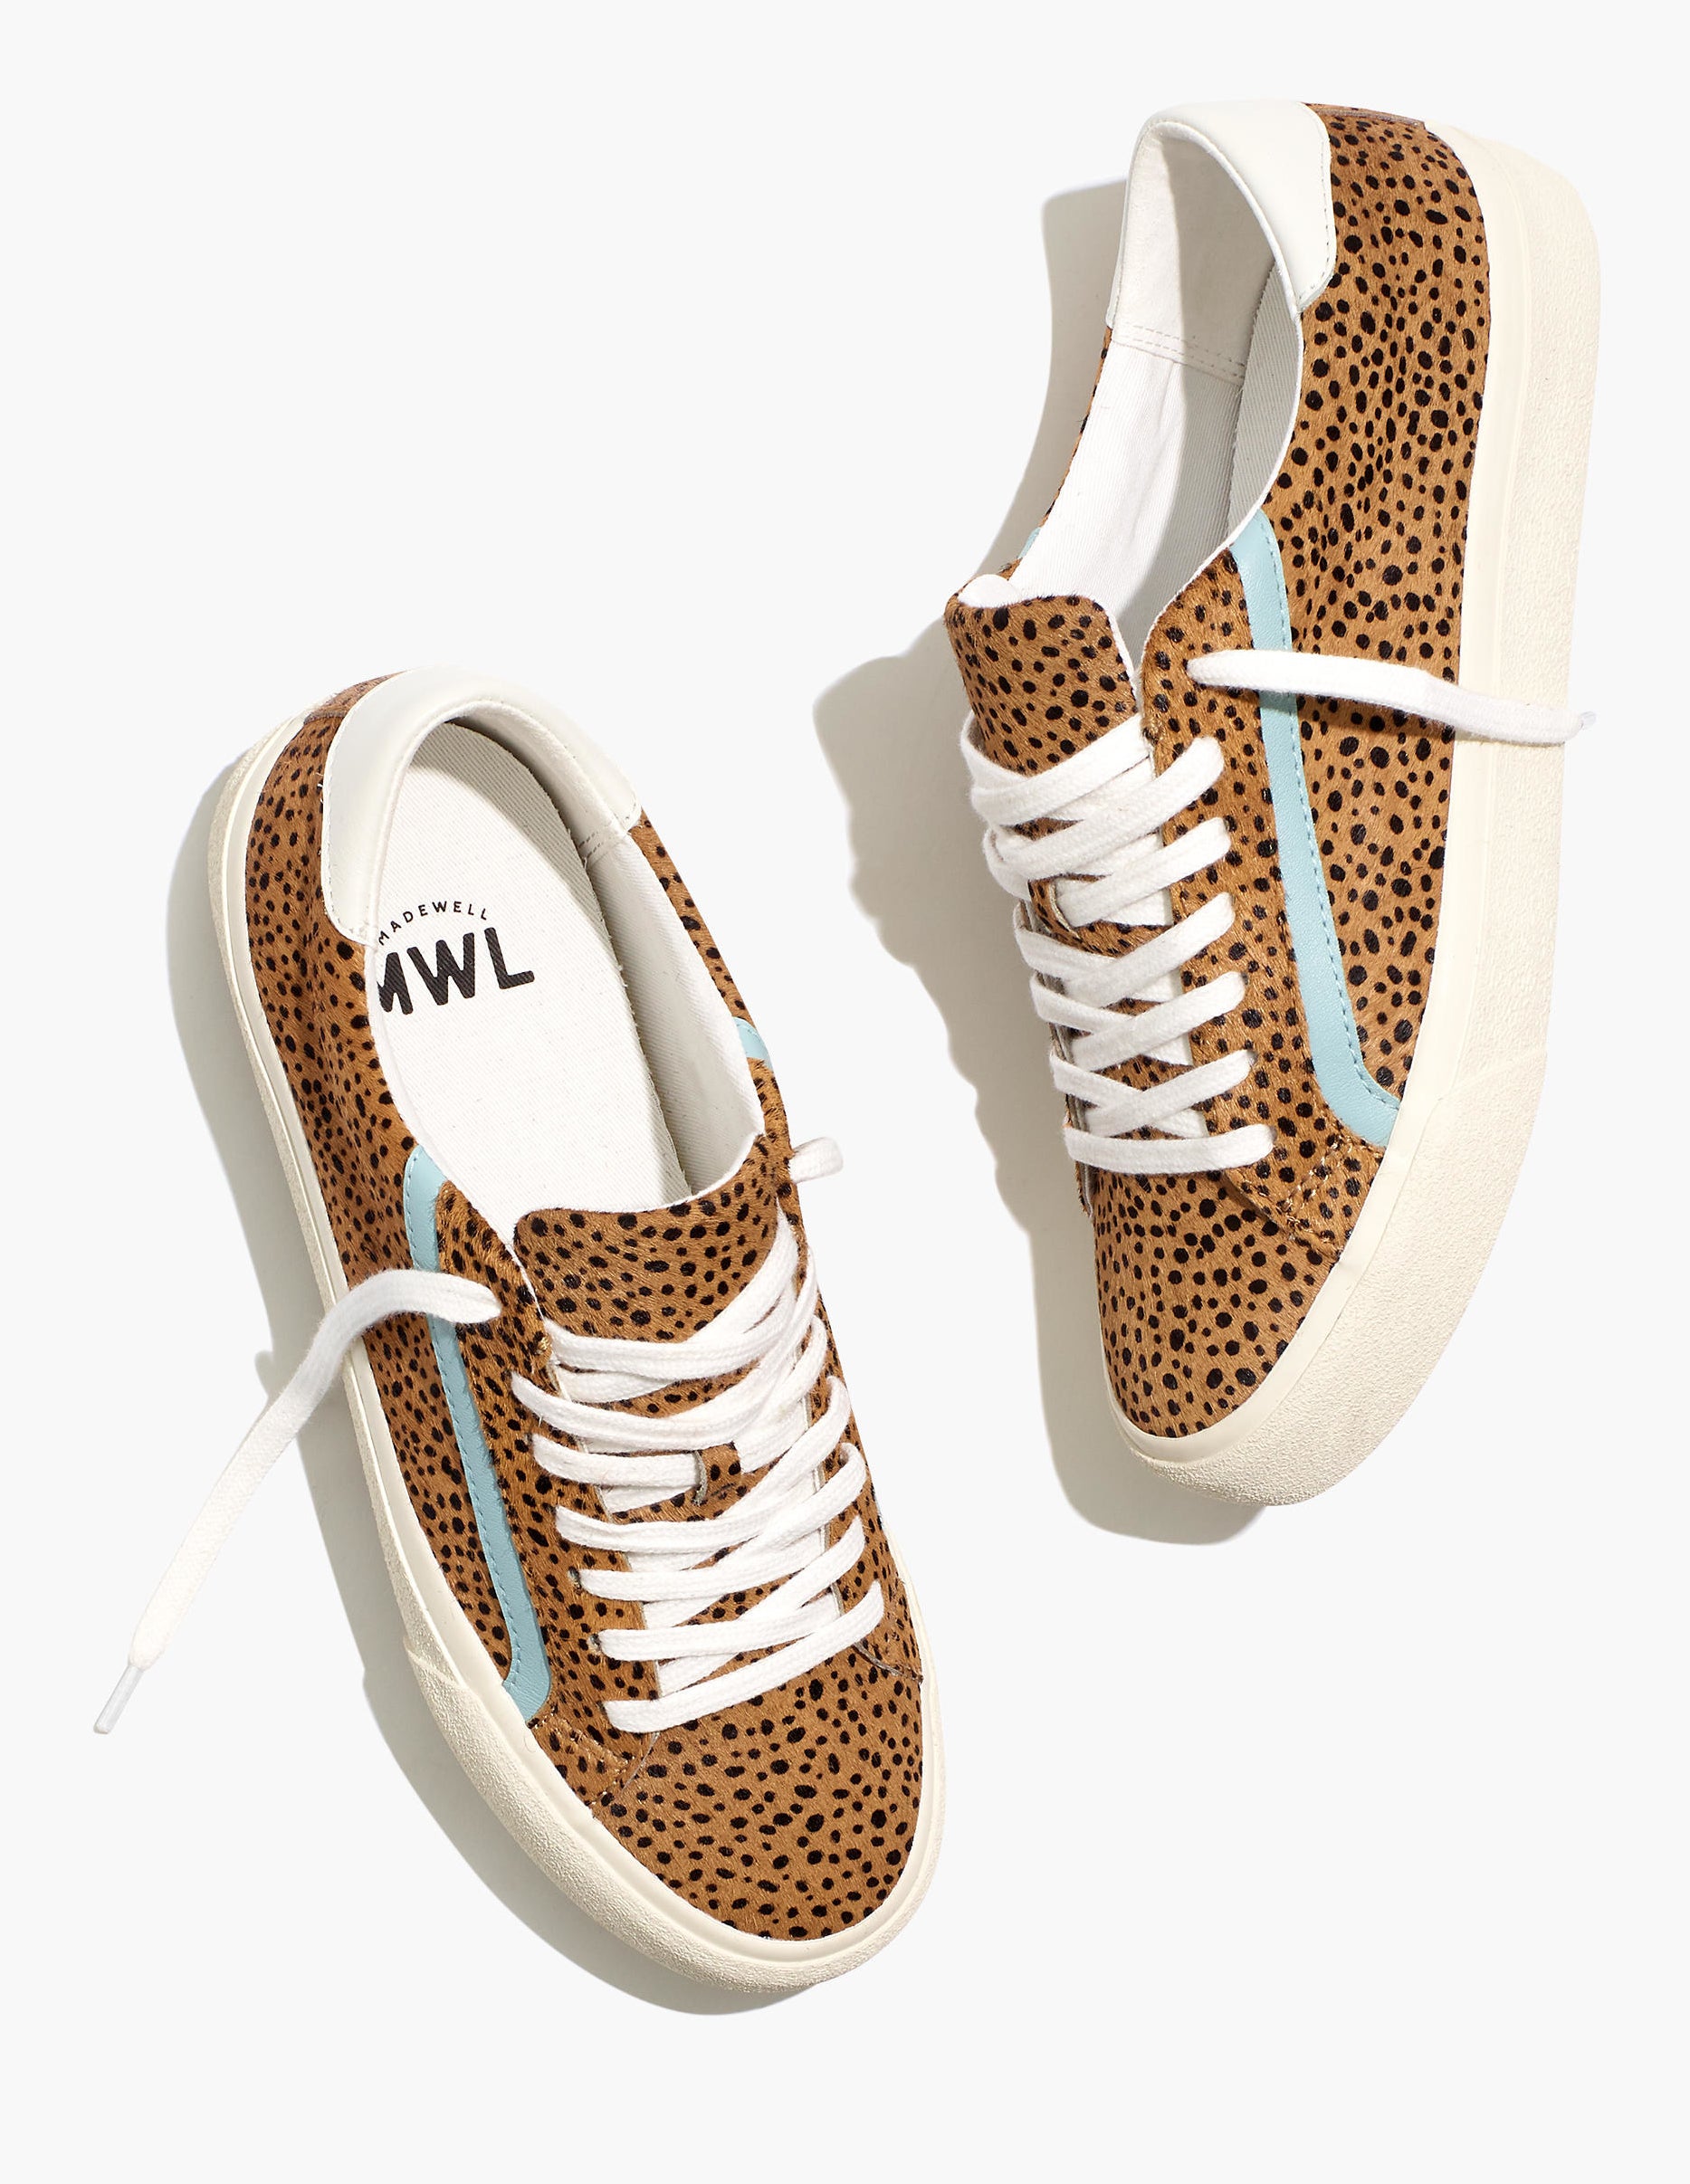 the tan calf hair spotted sneakers with a solid pale blue line on the side of each shoe